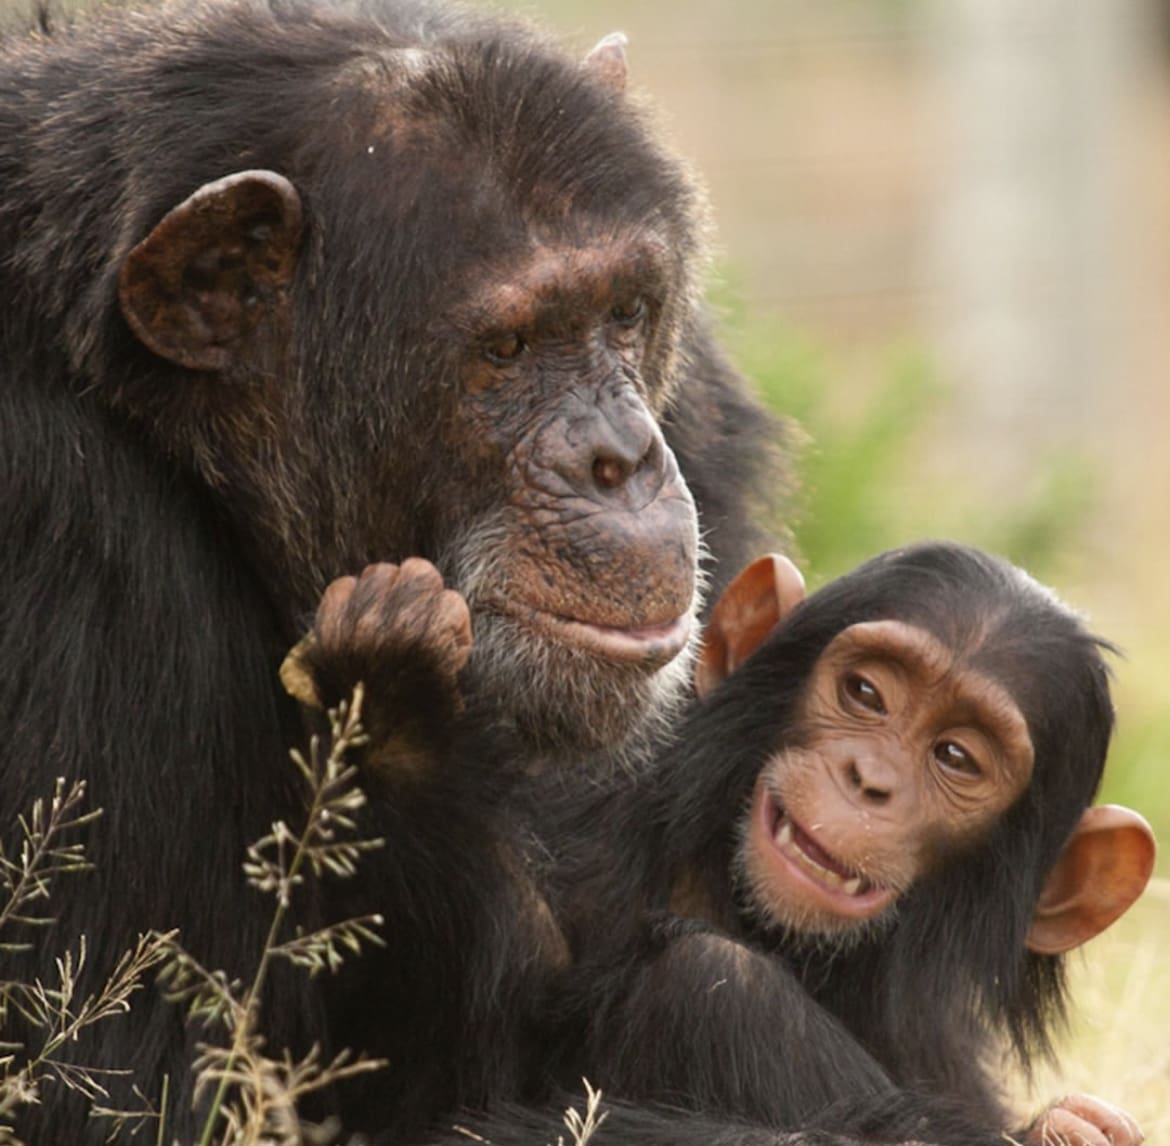 Baby chimp with its mother